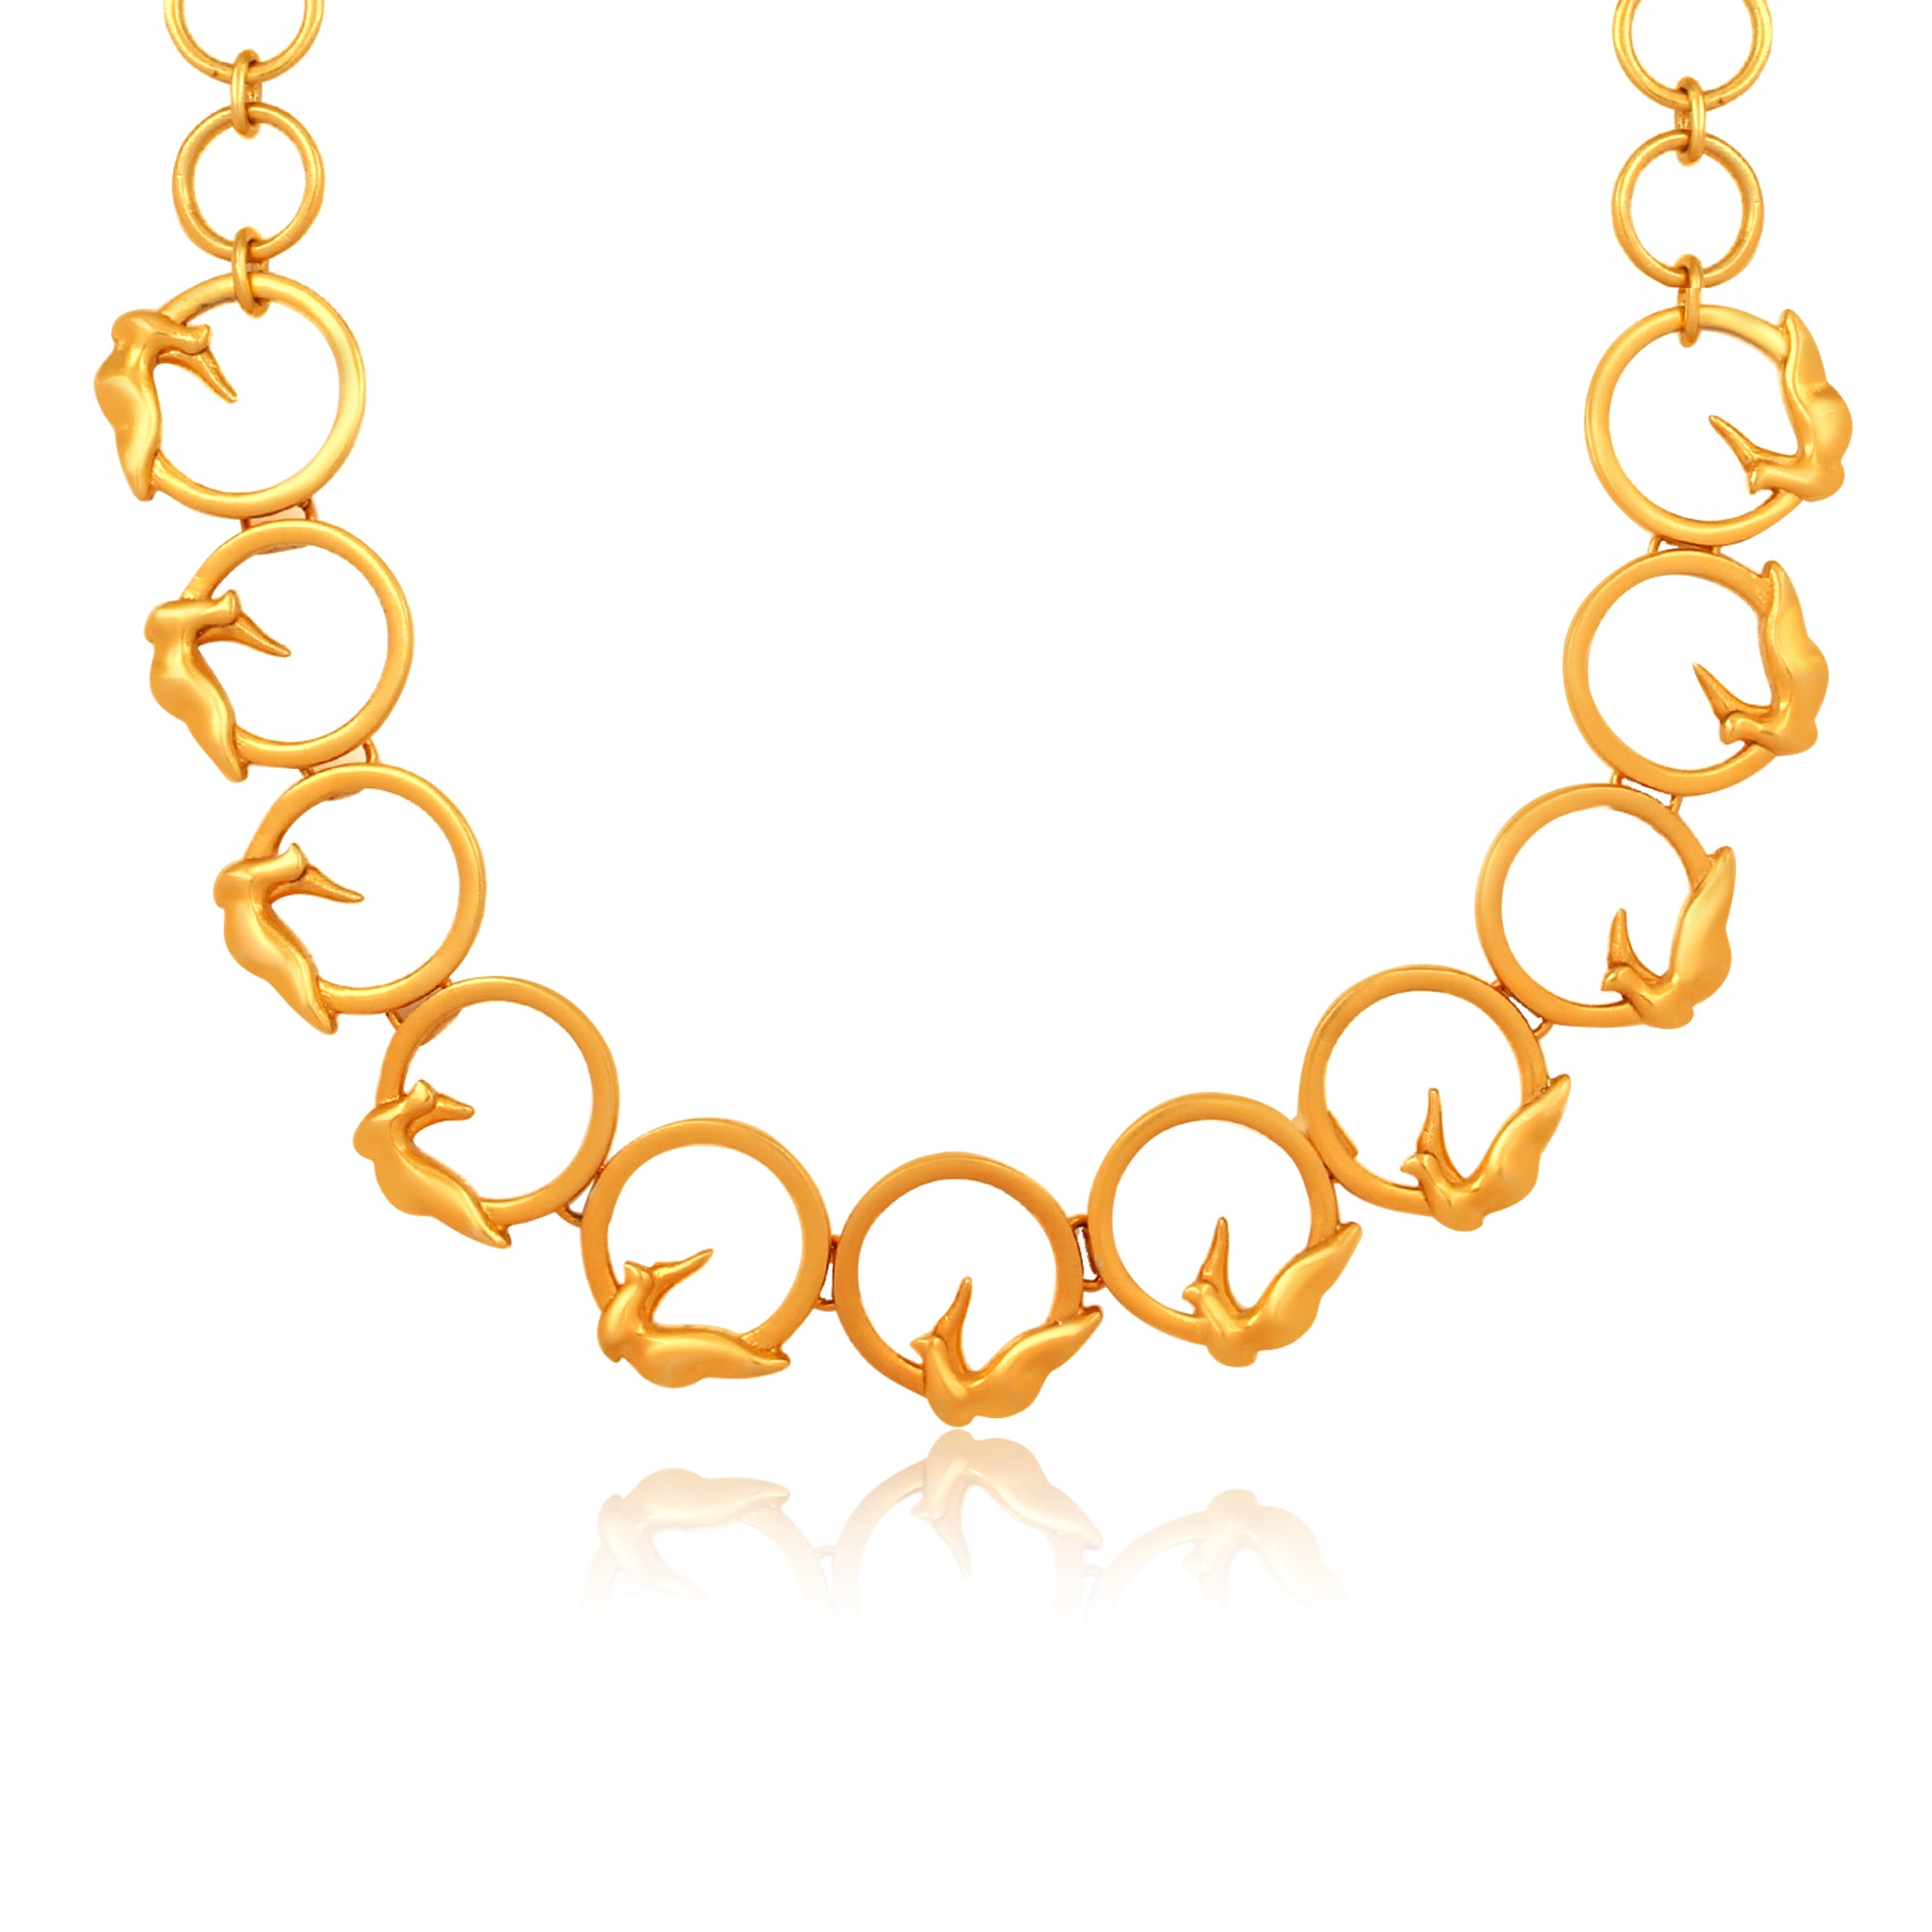 Circle of Freedom Gold Necklace